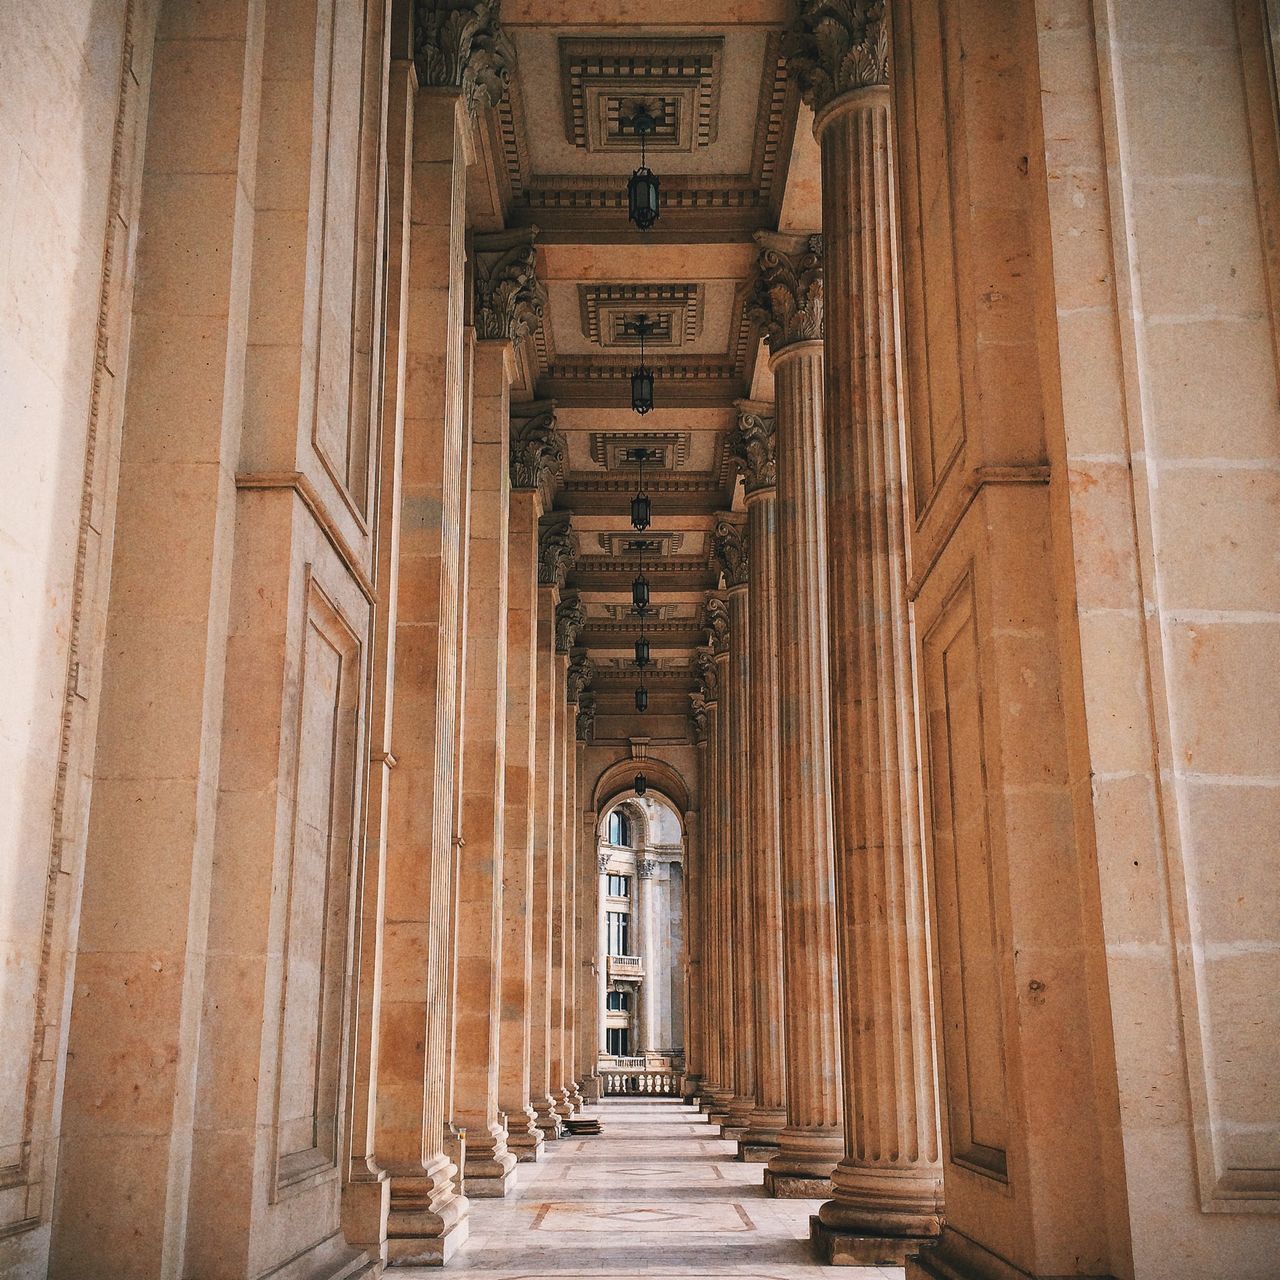 the way forward, architecture, indoors, built structure, diminishing perspective, corridor, vanishing point, narrow, colonnade, in a row, empty, steps, ceiling, architectural column, arch, column, history, long, old, absence